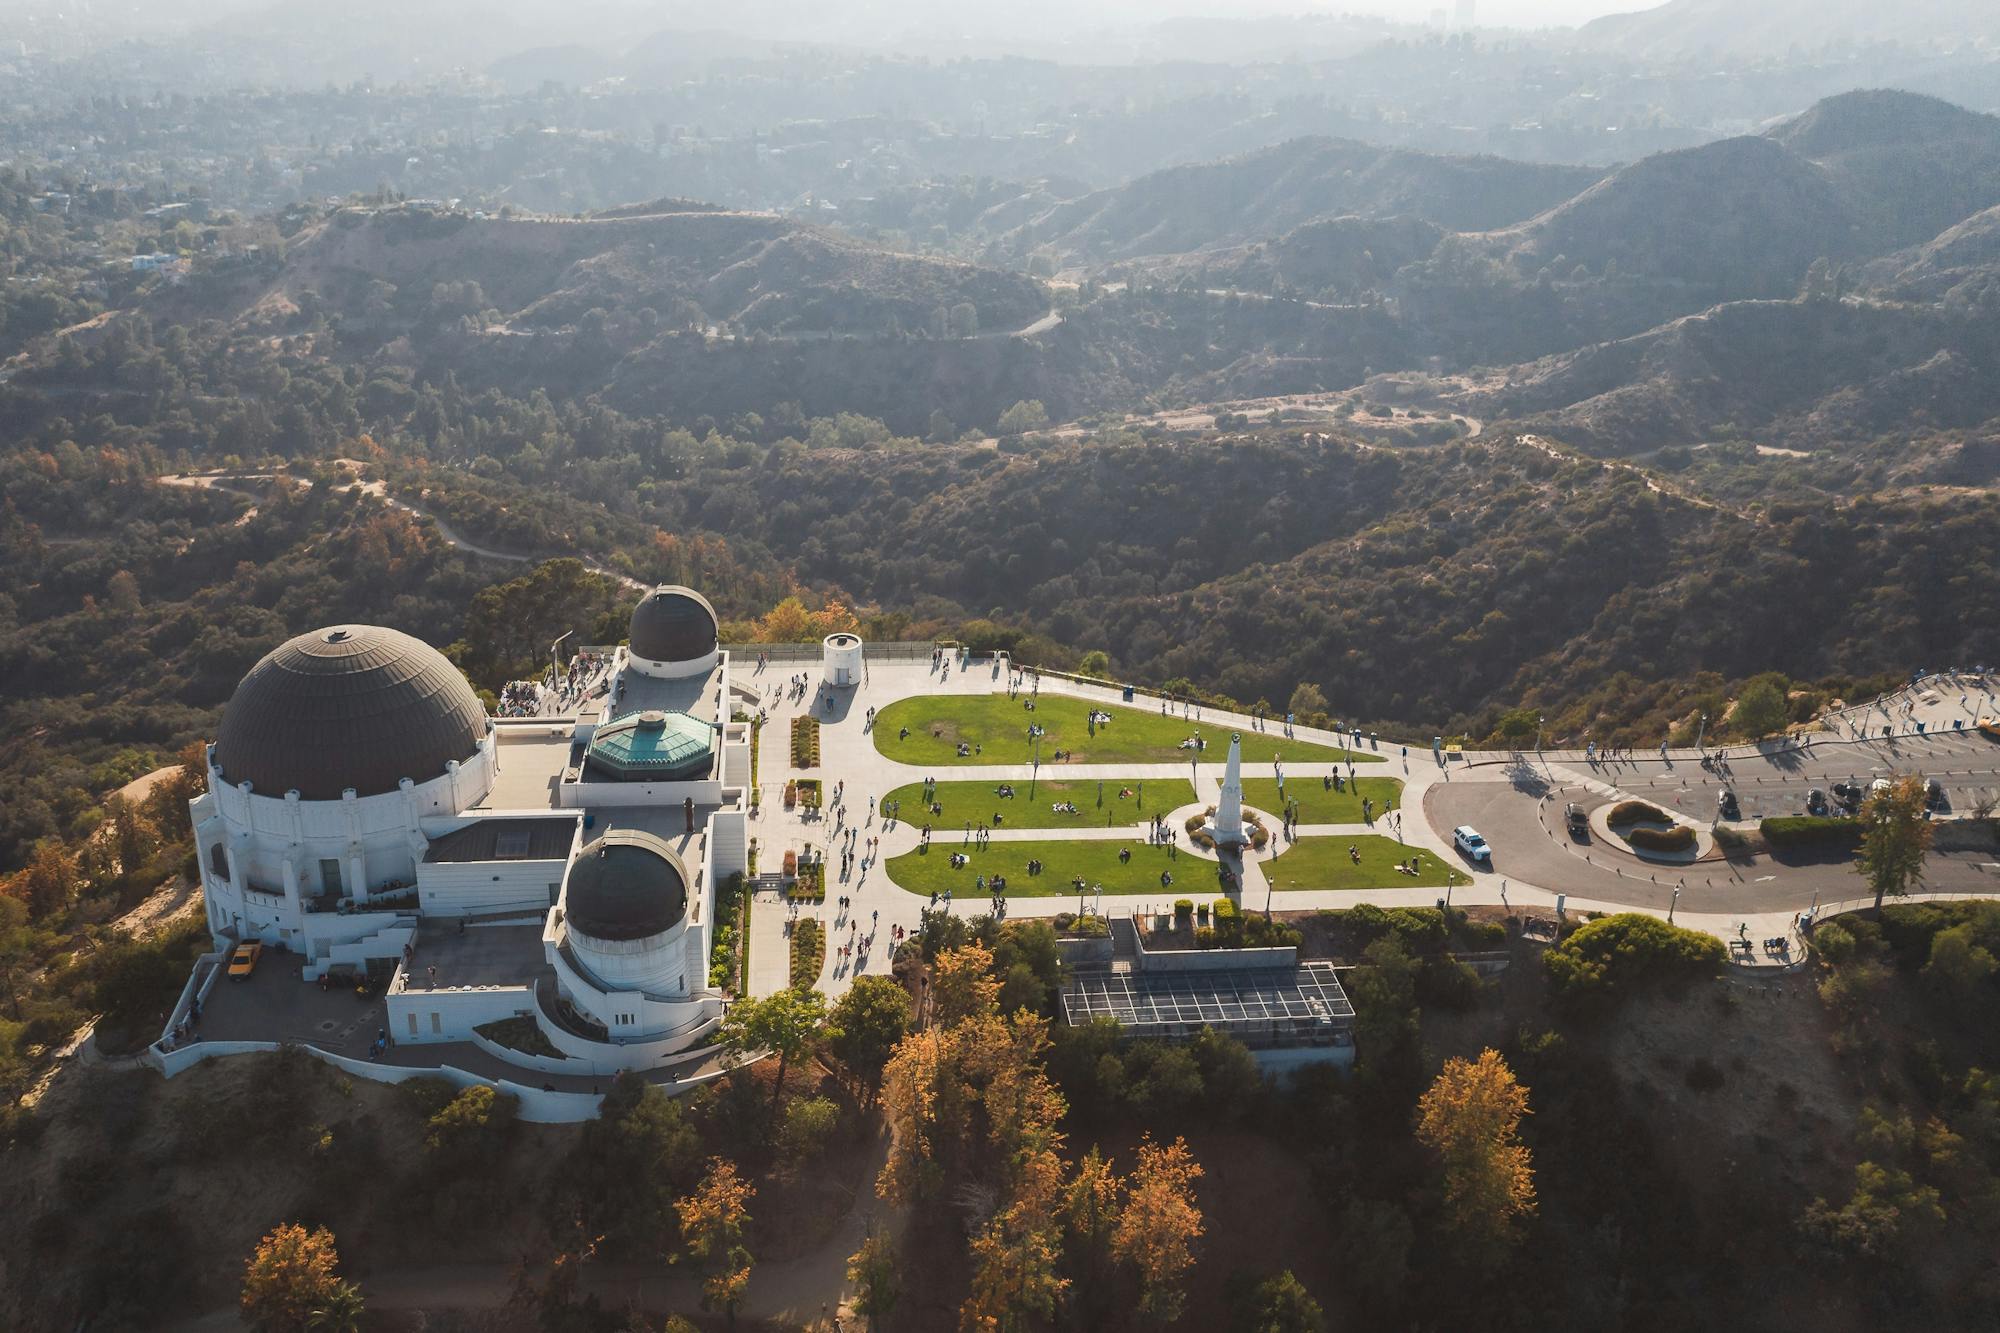 The Griffith Observatory from above